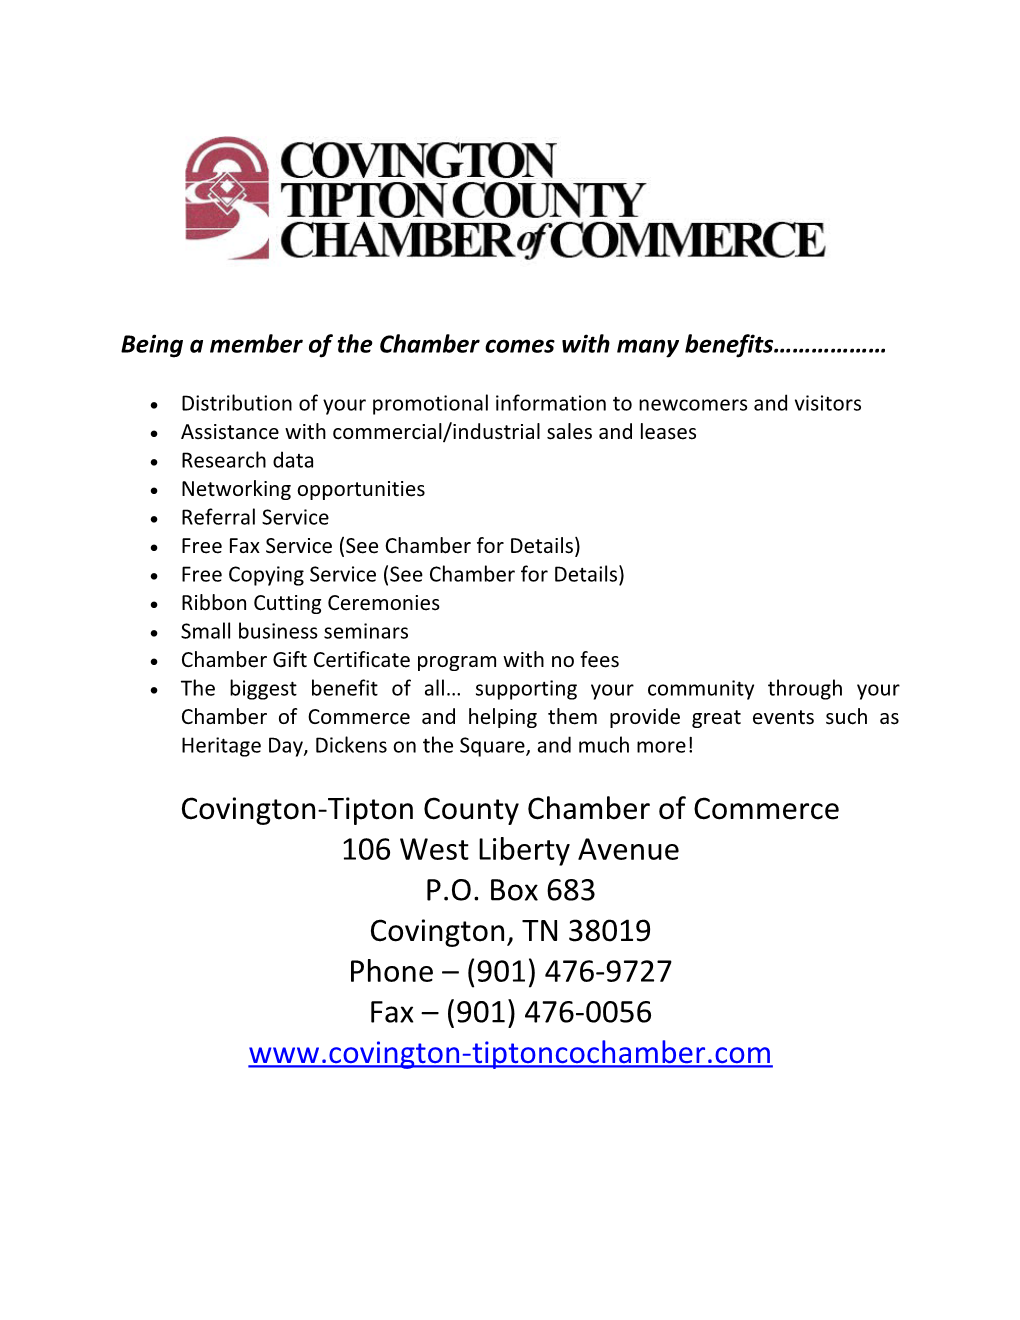 Being a Member of the Chamber Comes with Many Benefits